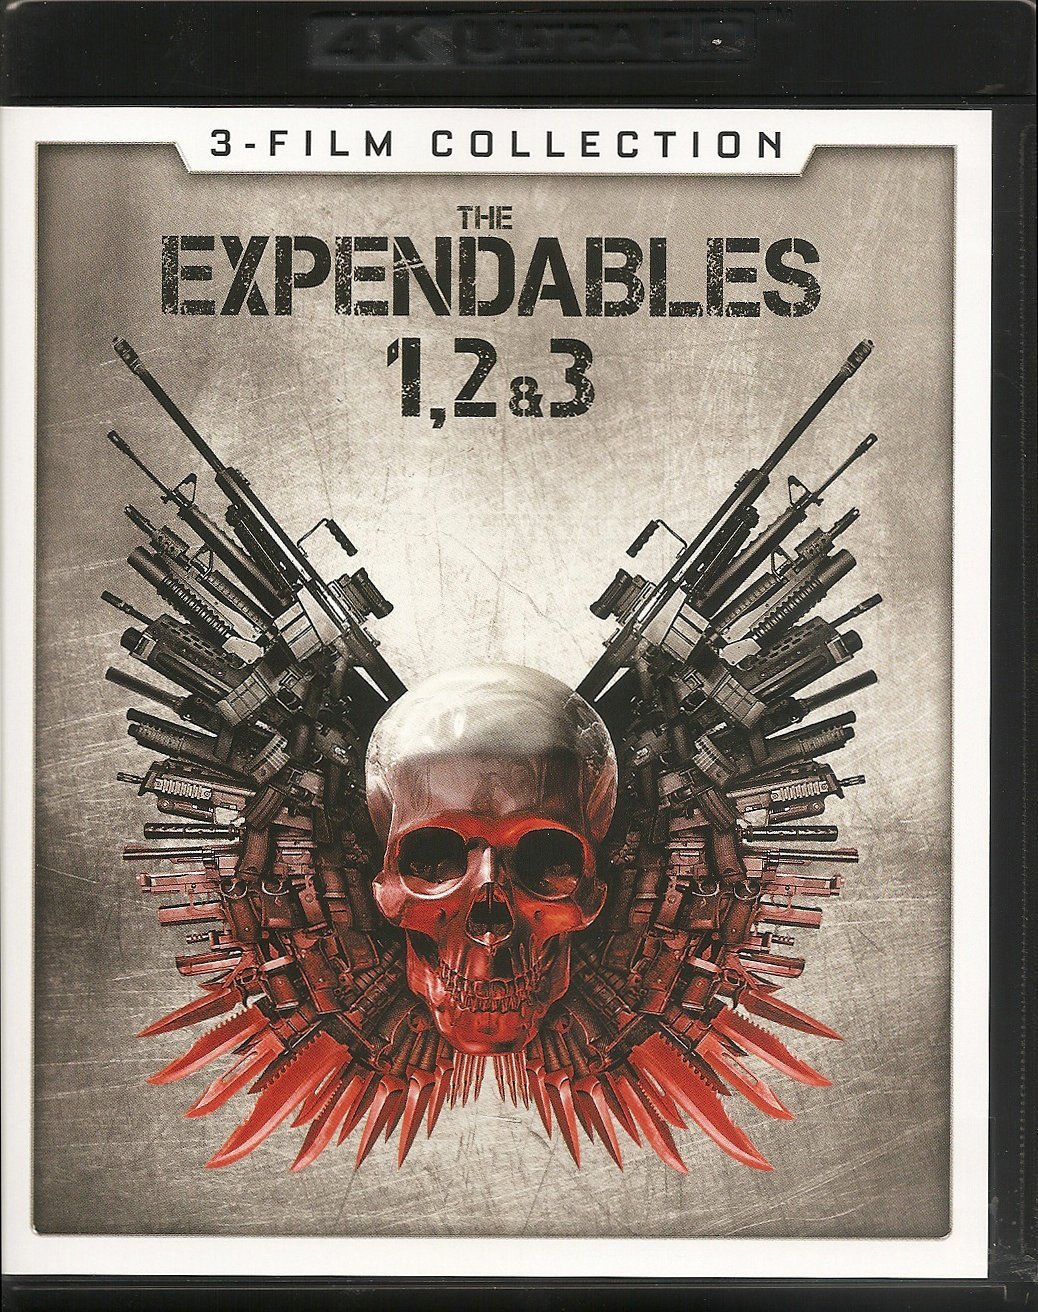 Expendables 3-Film Collection